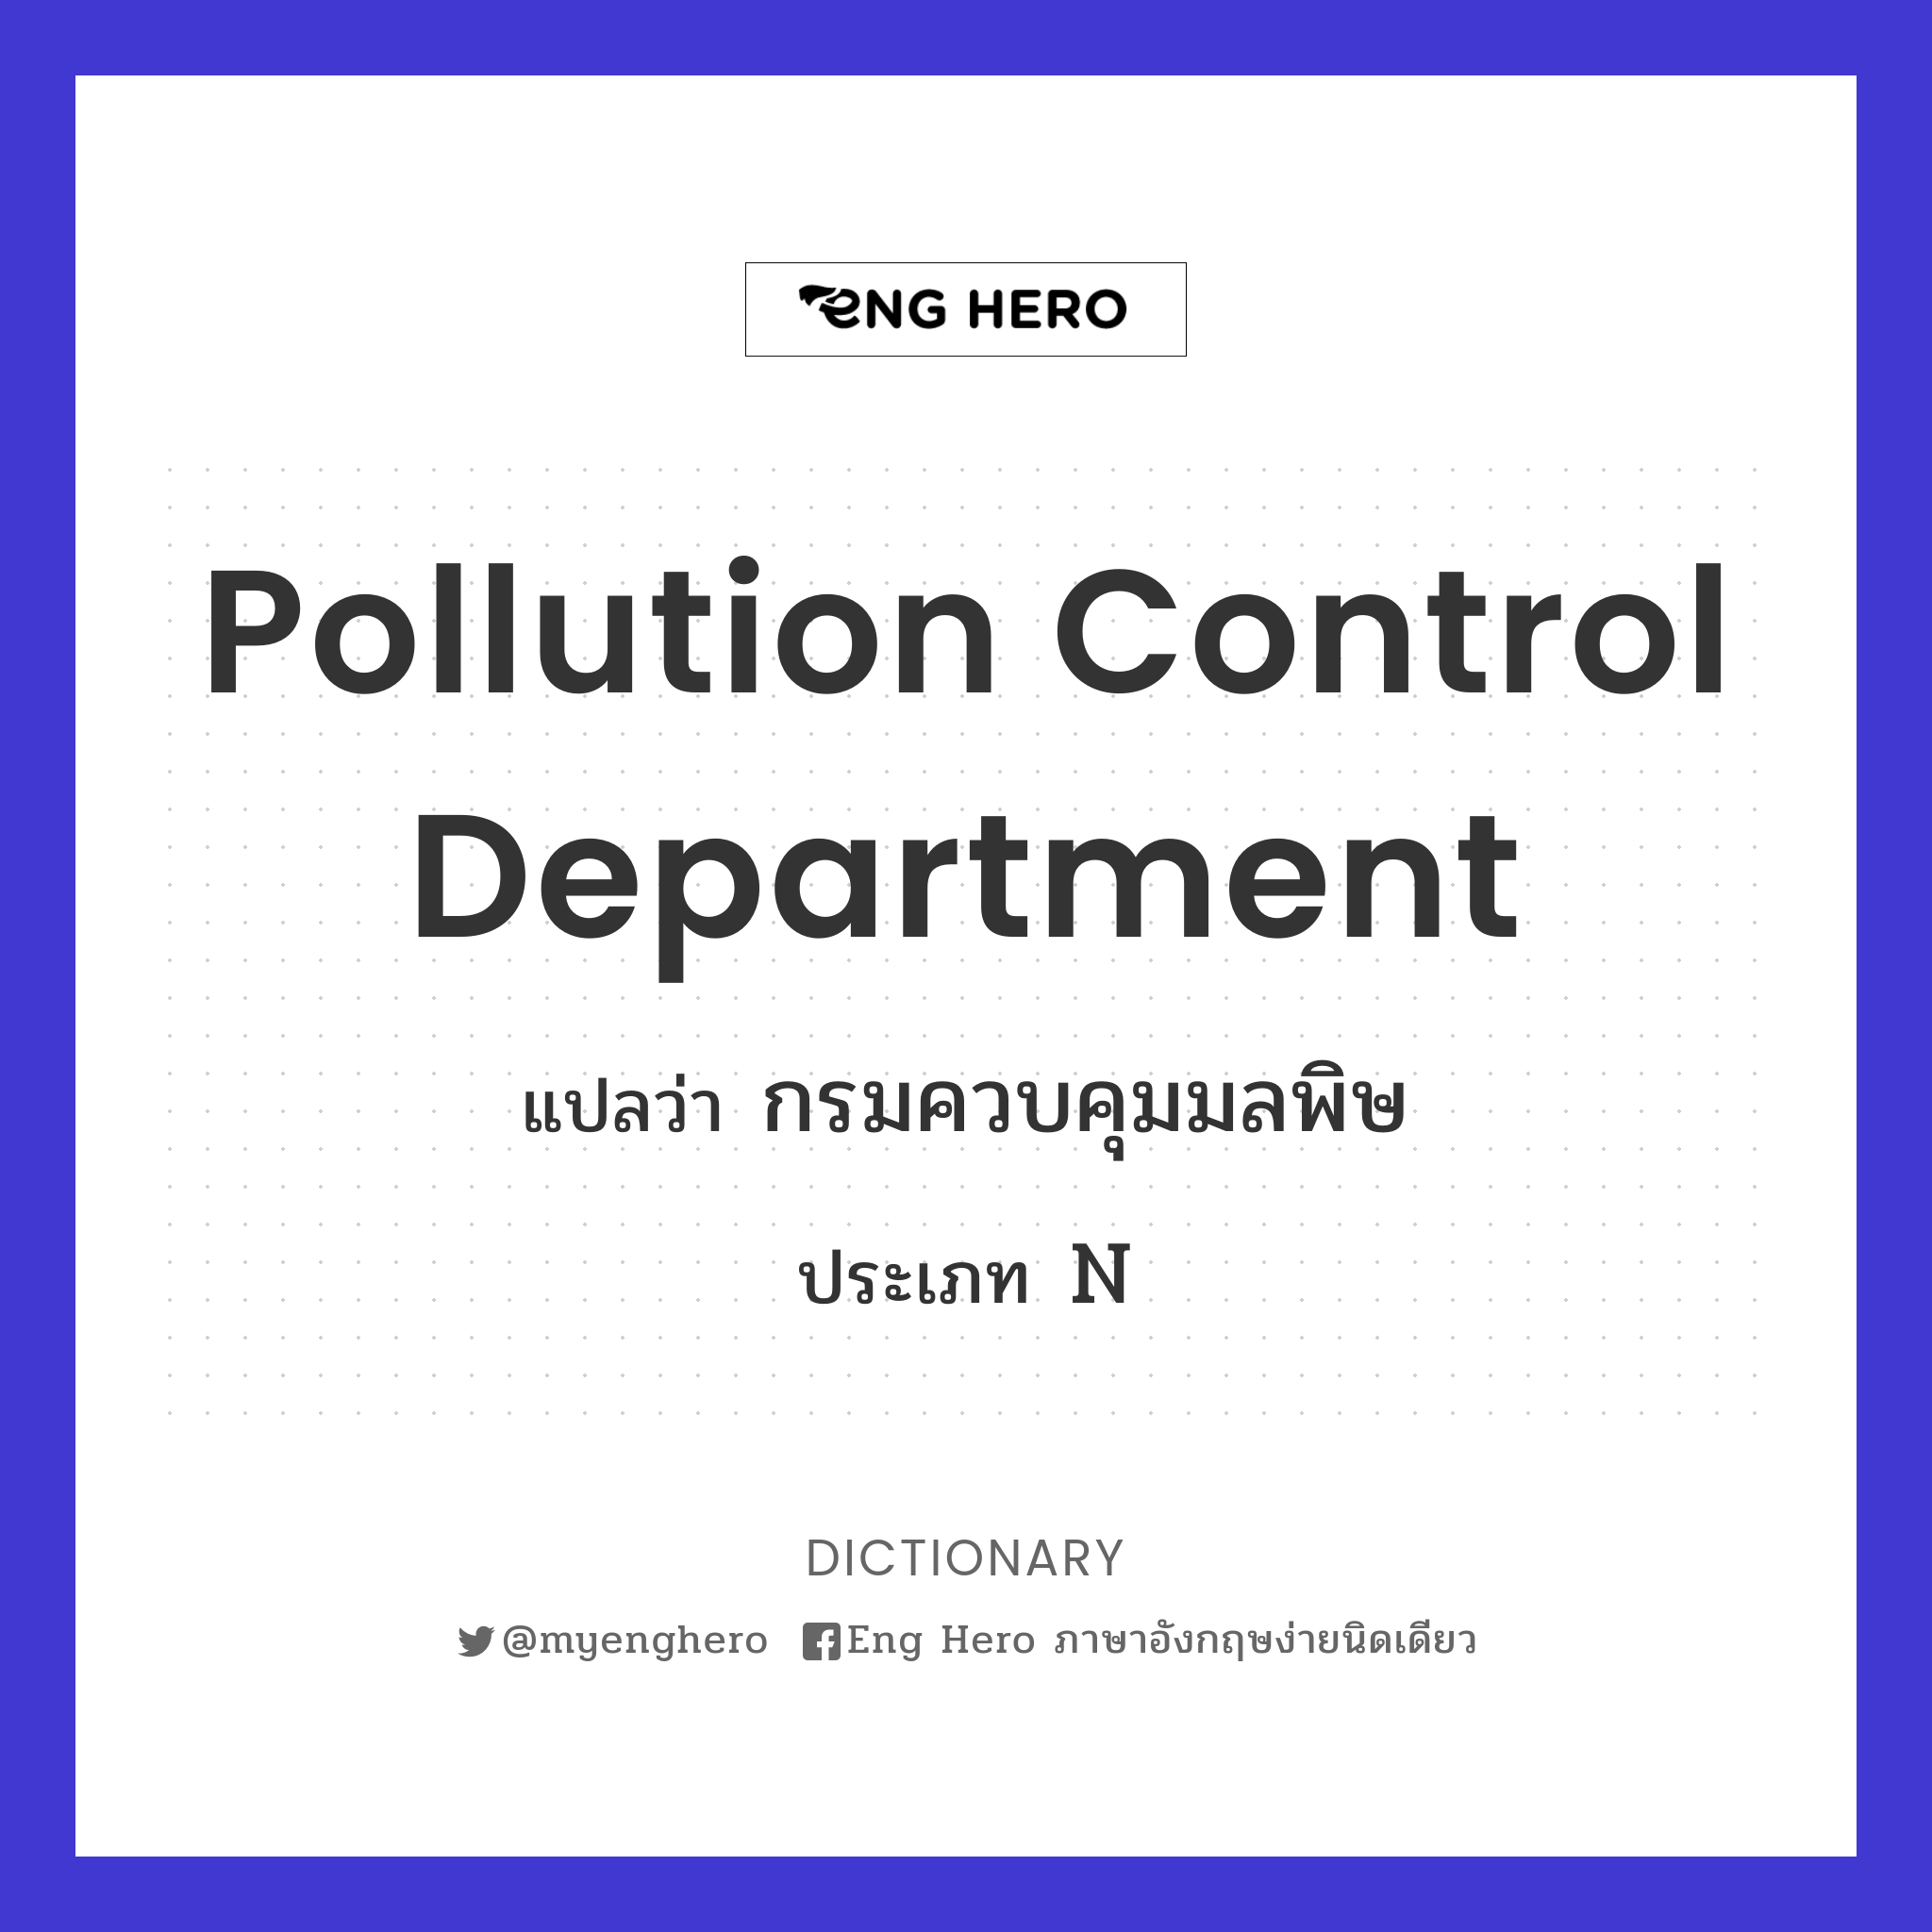 Pollution Control Department